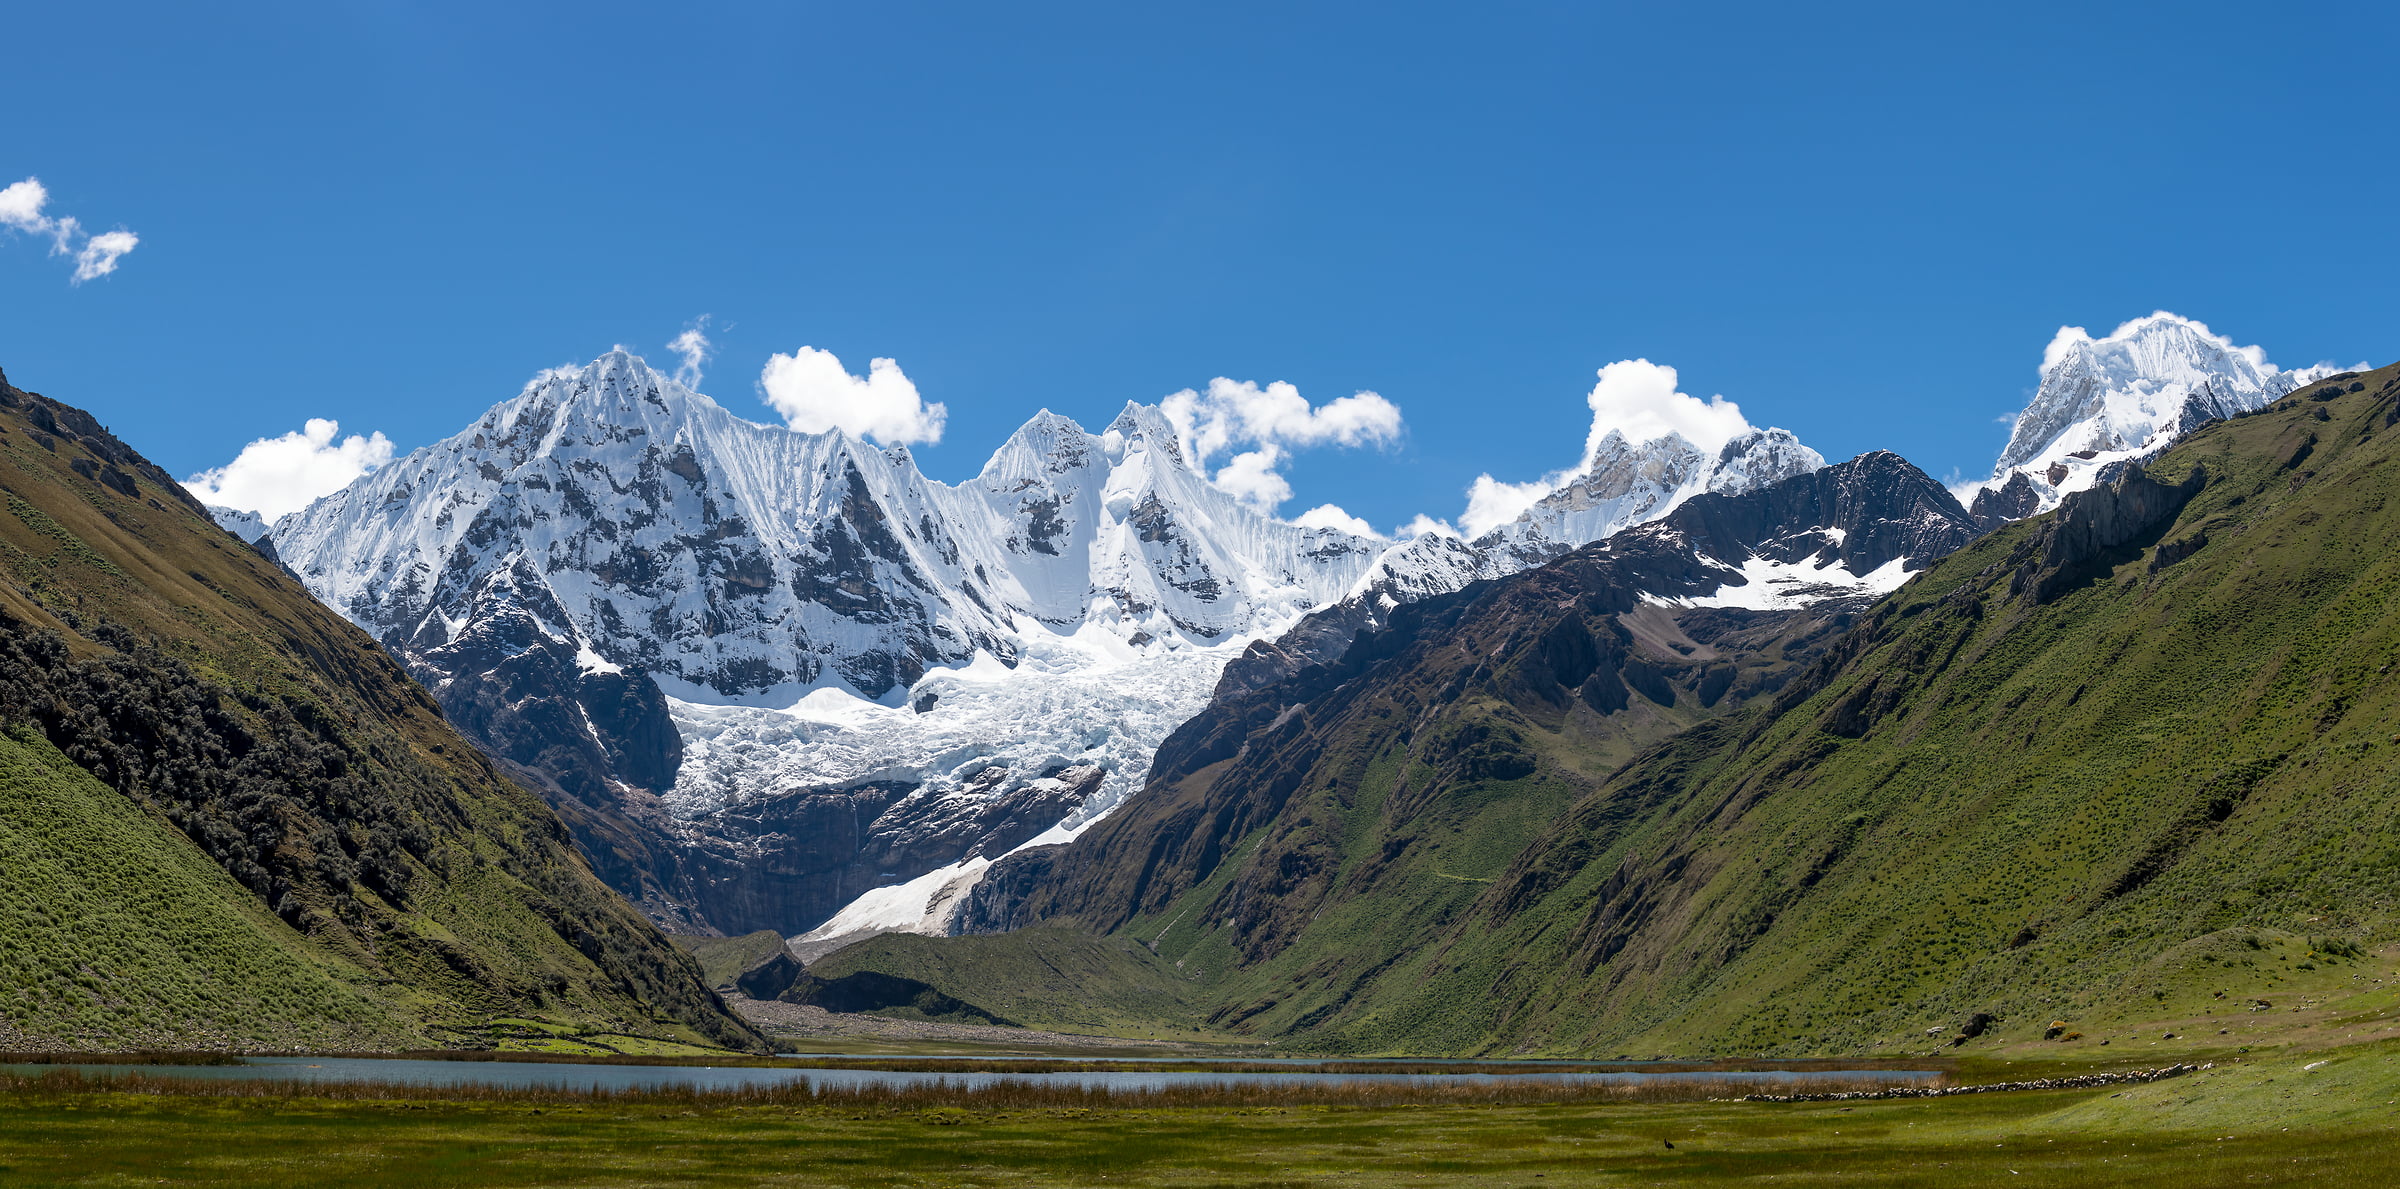 90 megapixels! A very high resolution, large-format VAST photo print of mountains and Cordillera Huayhuash Valley in Peru; fine art landscape photo created by Scott Rinckenberger